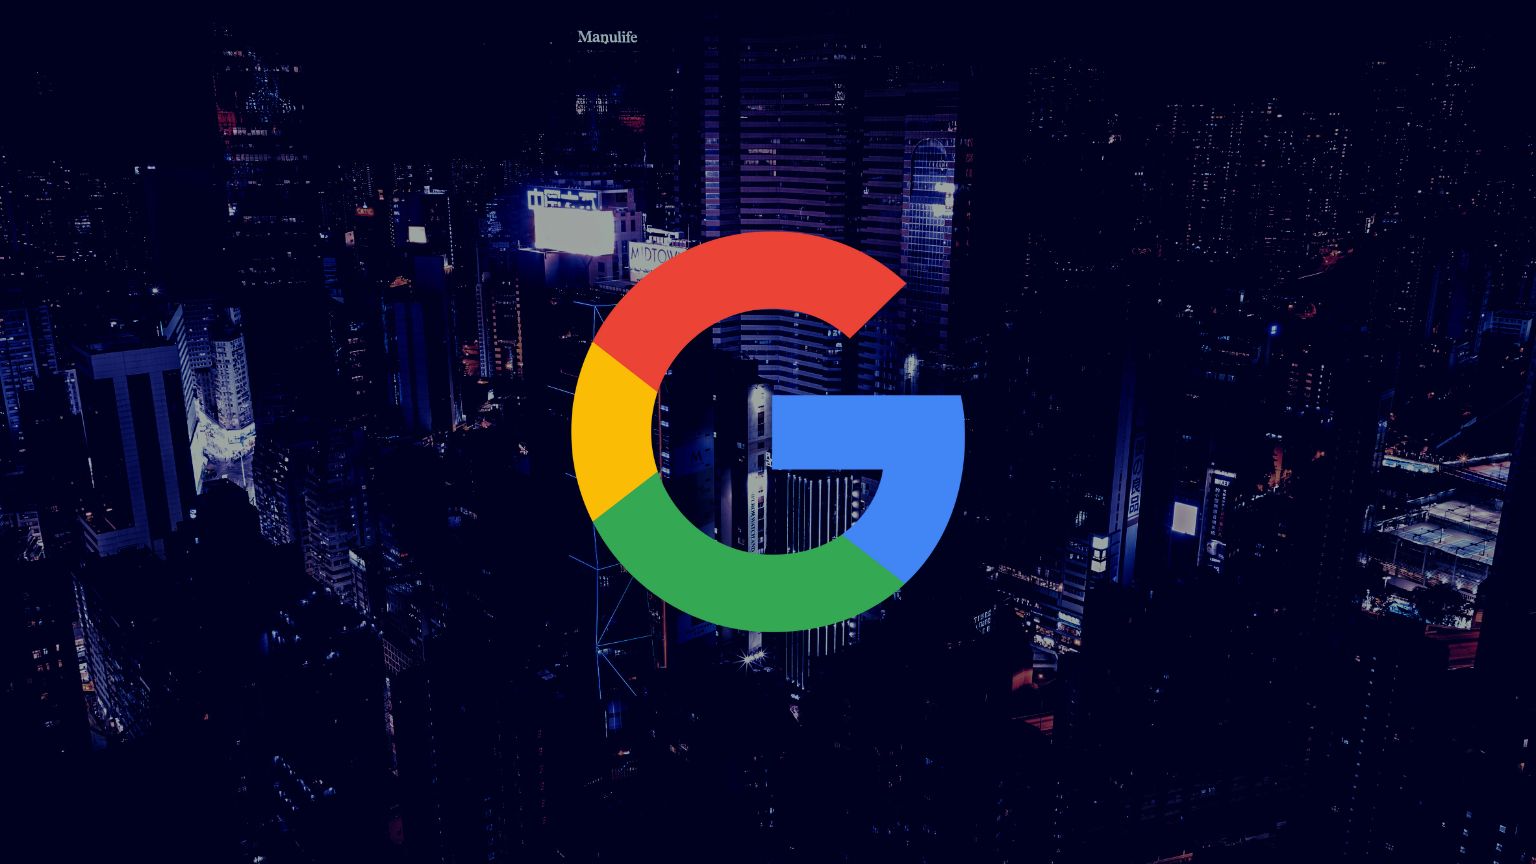 Hong Kong Authorities Battle To Get Google To Censor Song By Pro-Democracy Groups